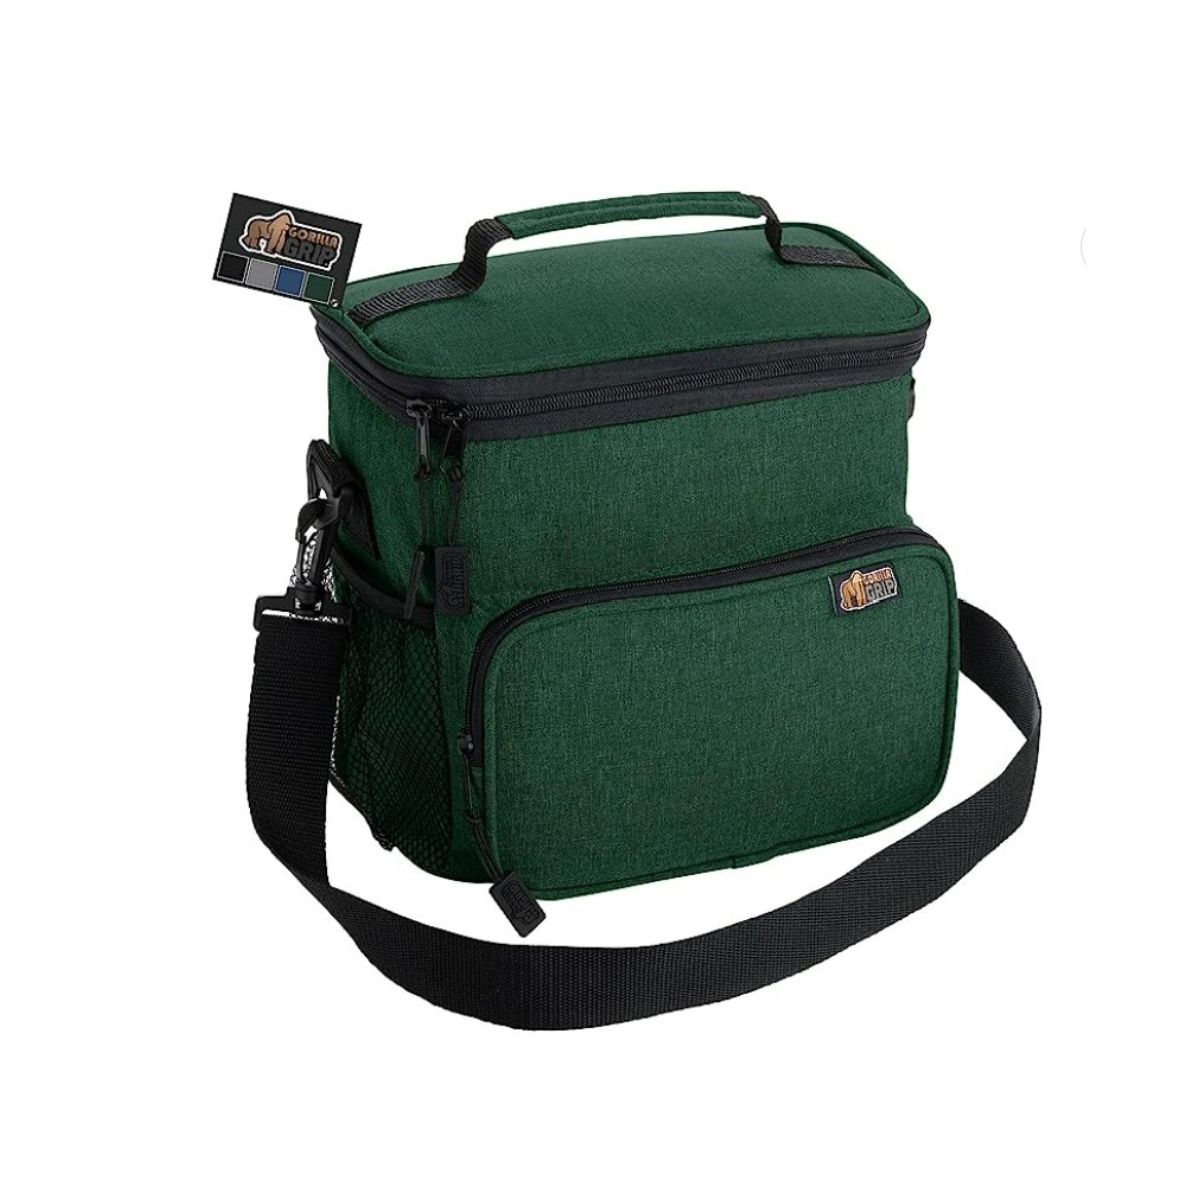 Green insulated lunch box with black straps